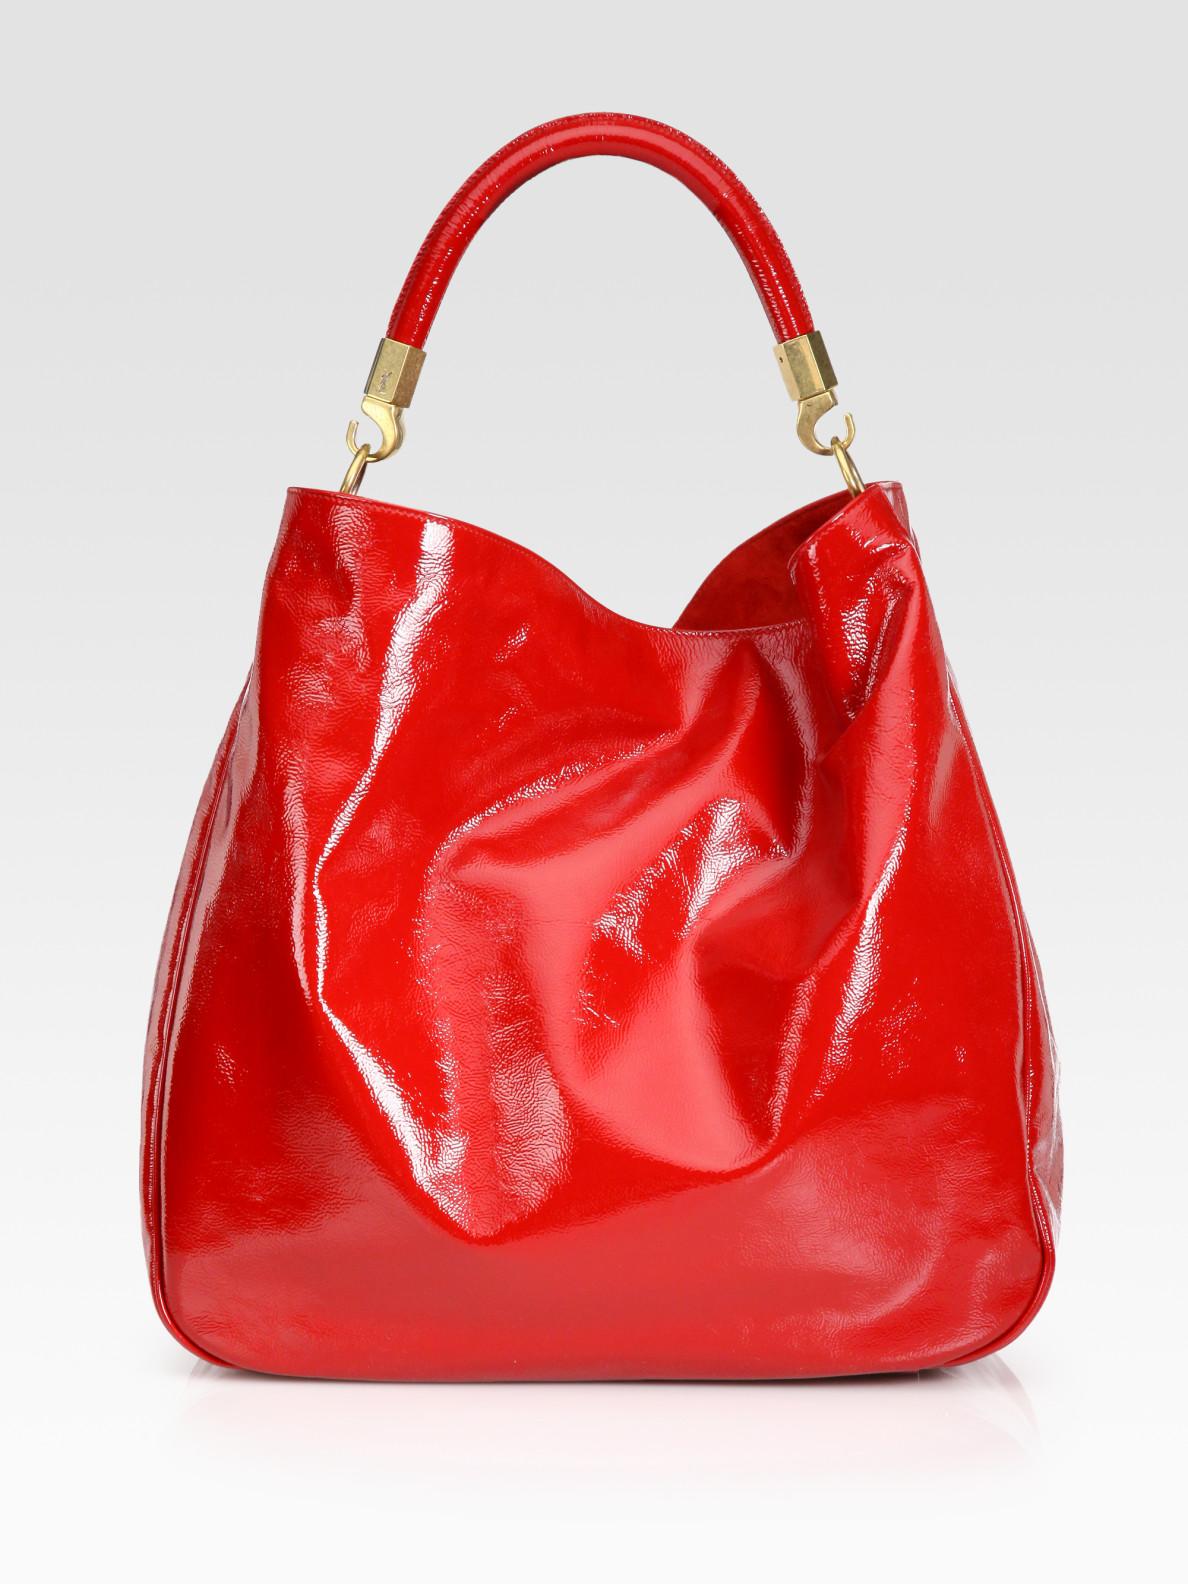 Saint Laurent Ysl Large Patent Leather Roady Hobo in Red (poppy) | Lyst